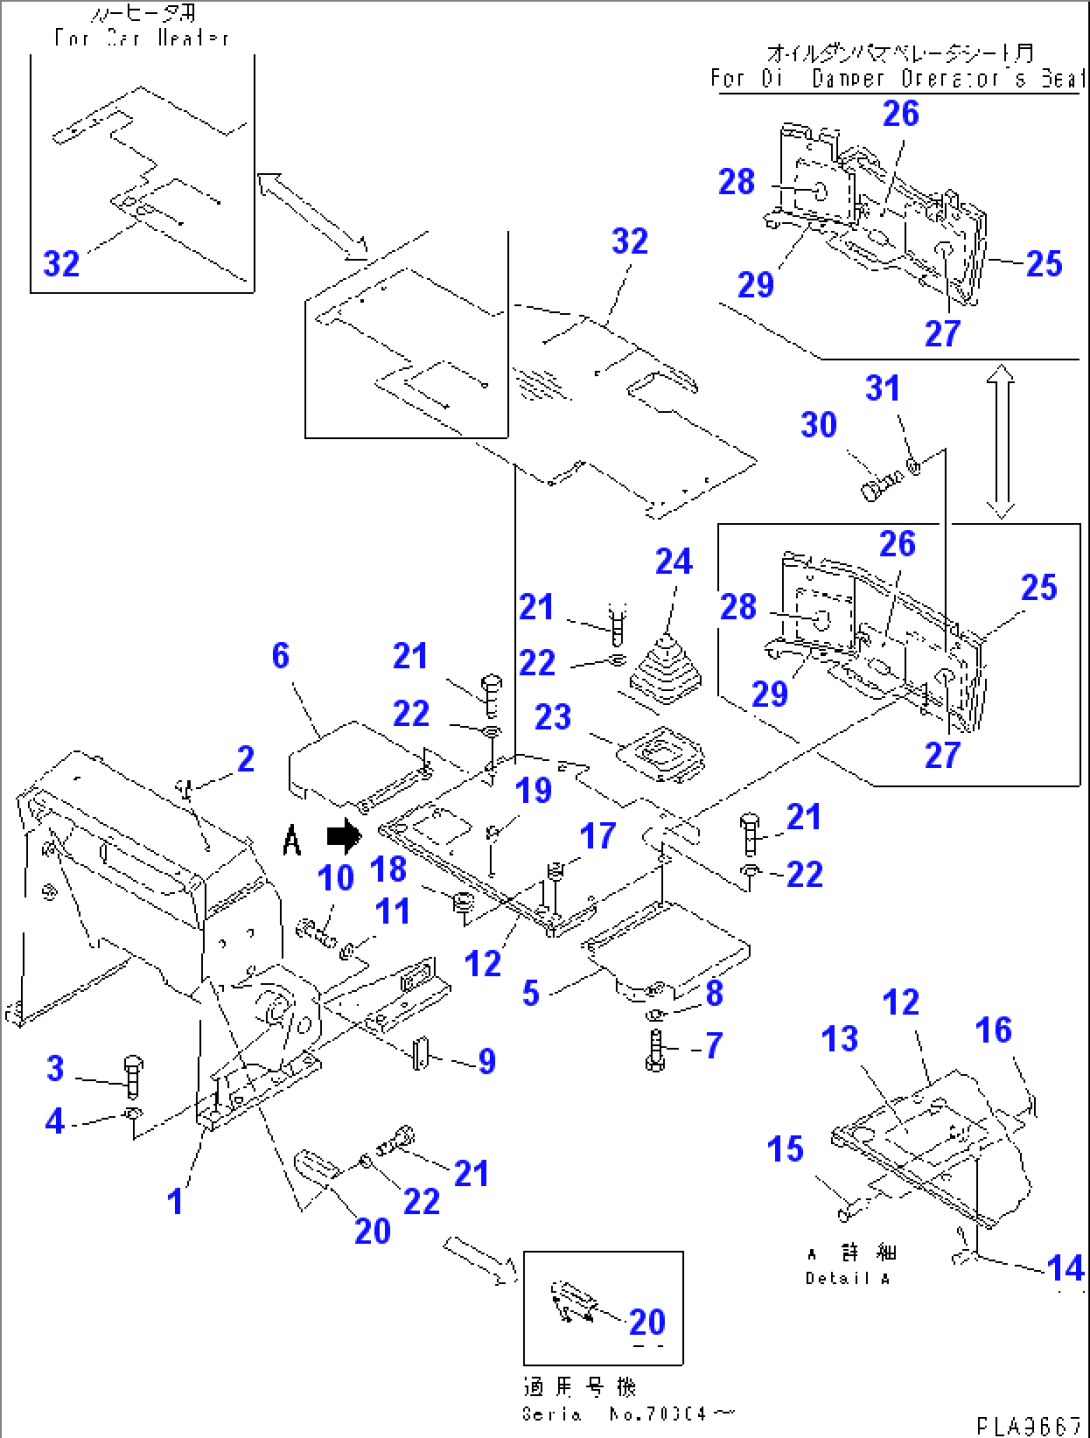 LOADER FRAME AND FLOOR PLATE (WITH ROPS CAB)